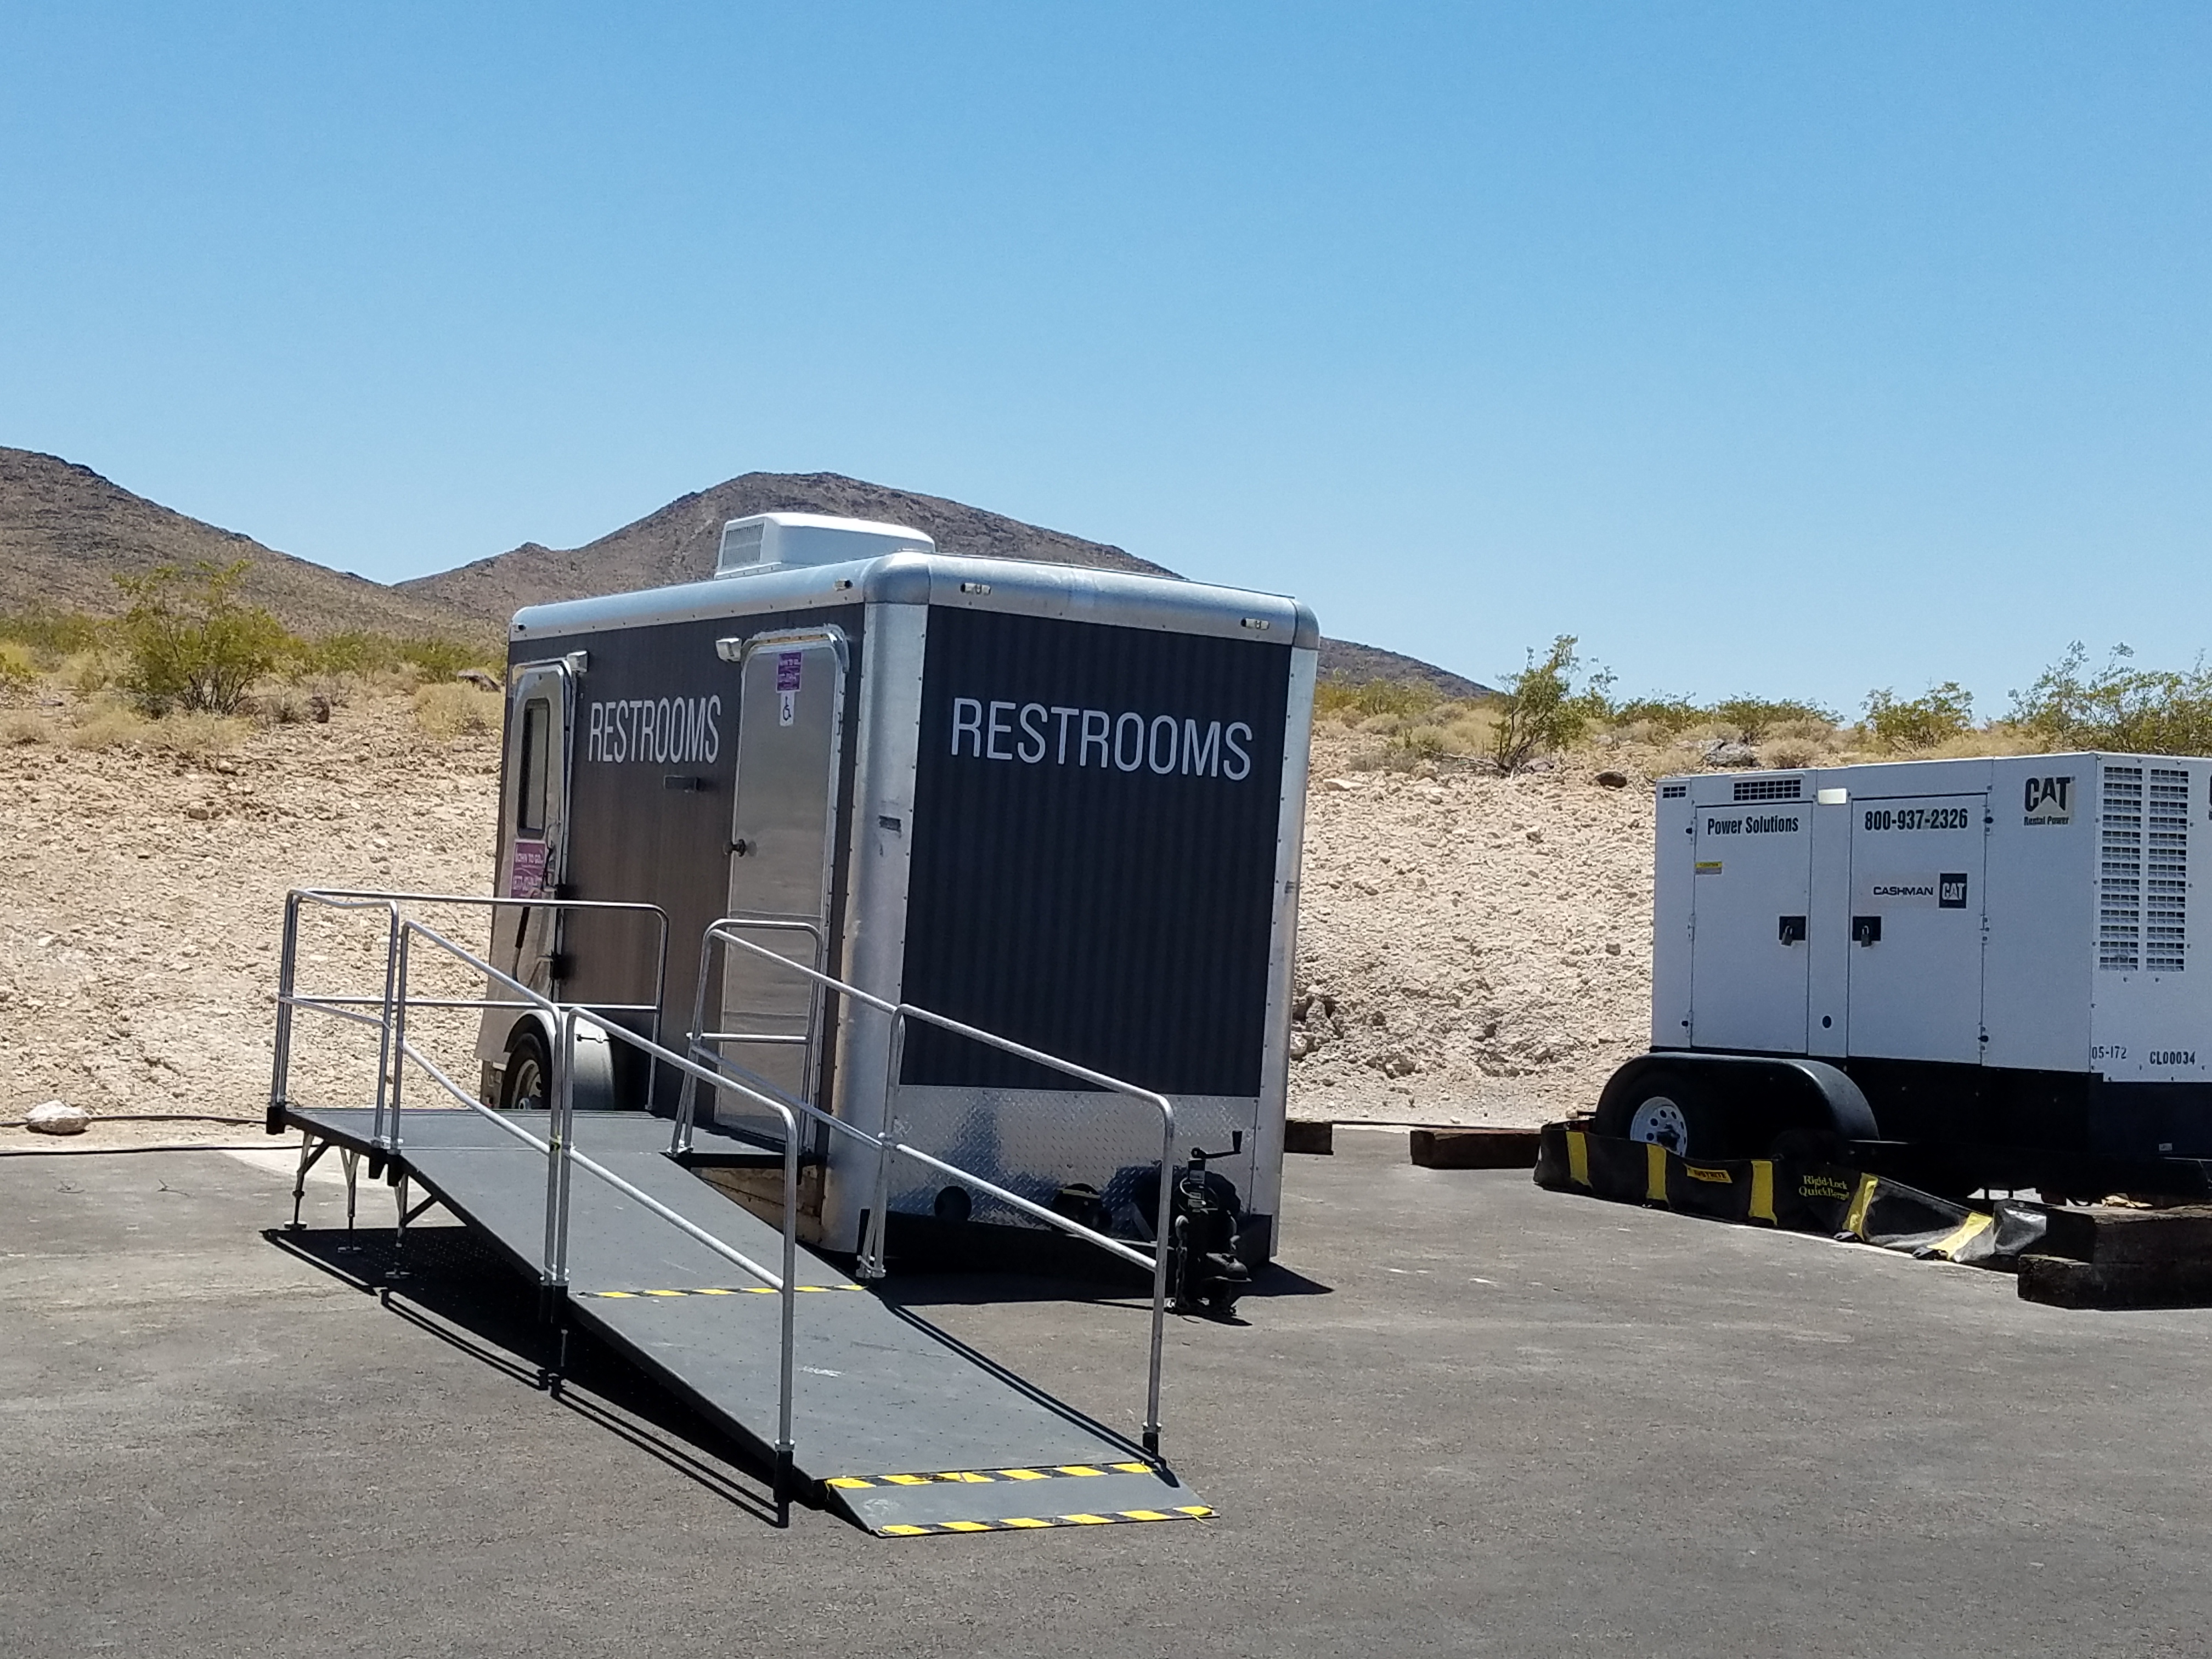 ADA Plus Two Station Vegas Restroom Trailer, at the Sloan National Park, In Las Vegas Nevada 